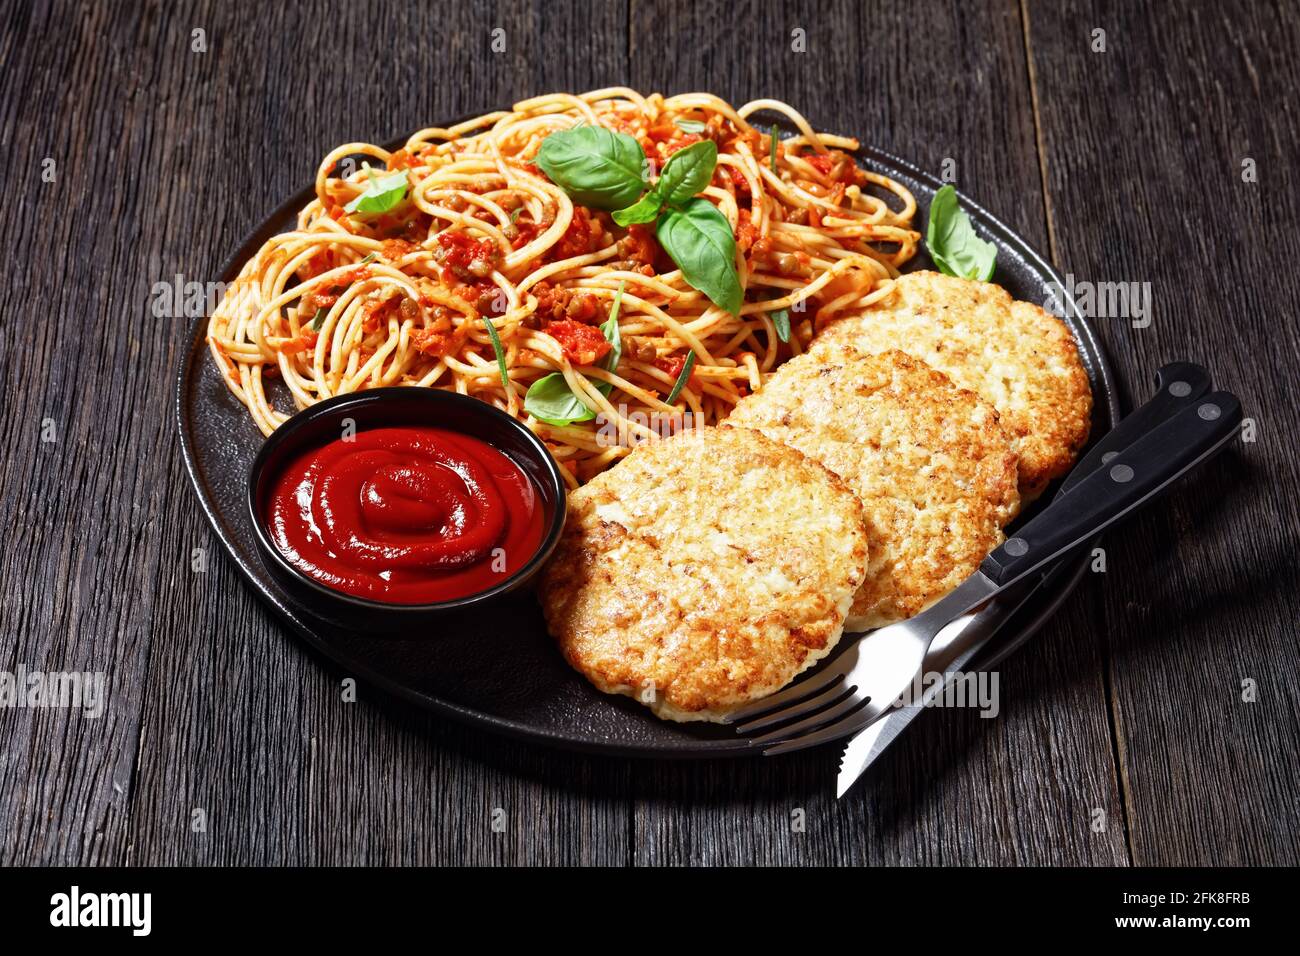 baked cod fish patties served on a black plate with spaghetti mixed with lentils, tomato sauce and herbs, horizontal view from above Stock Photo